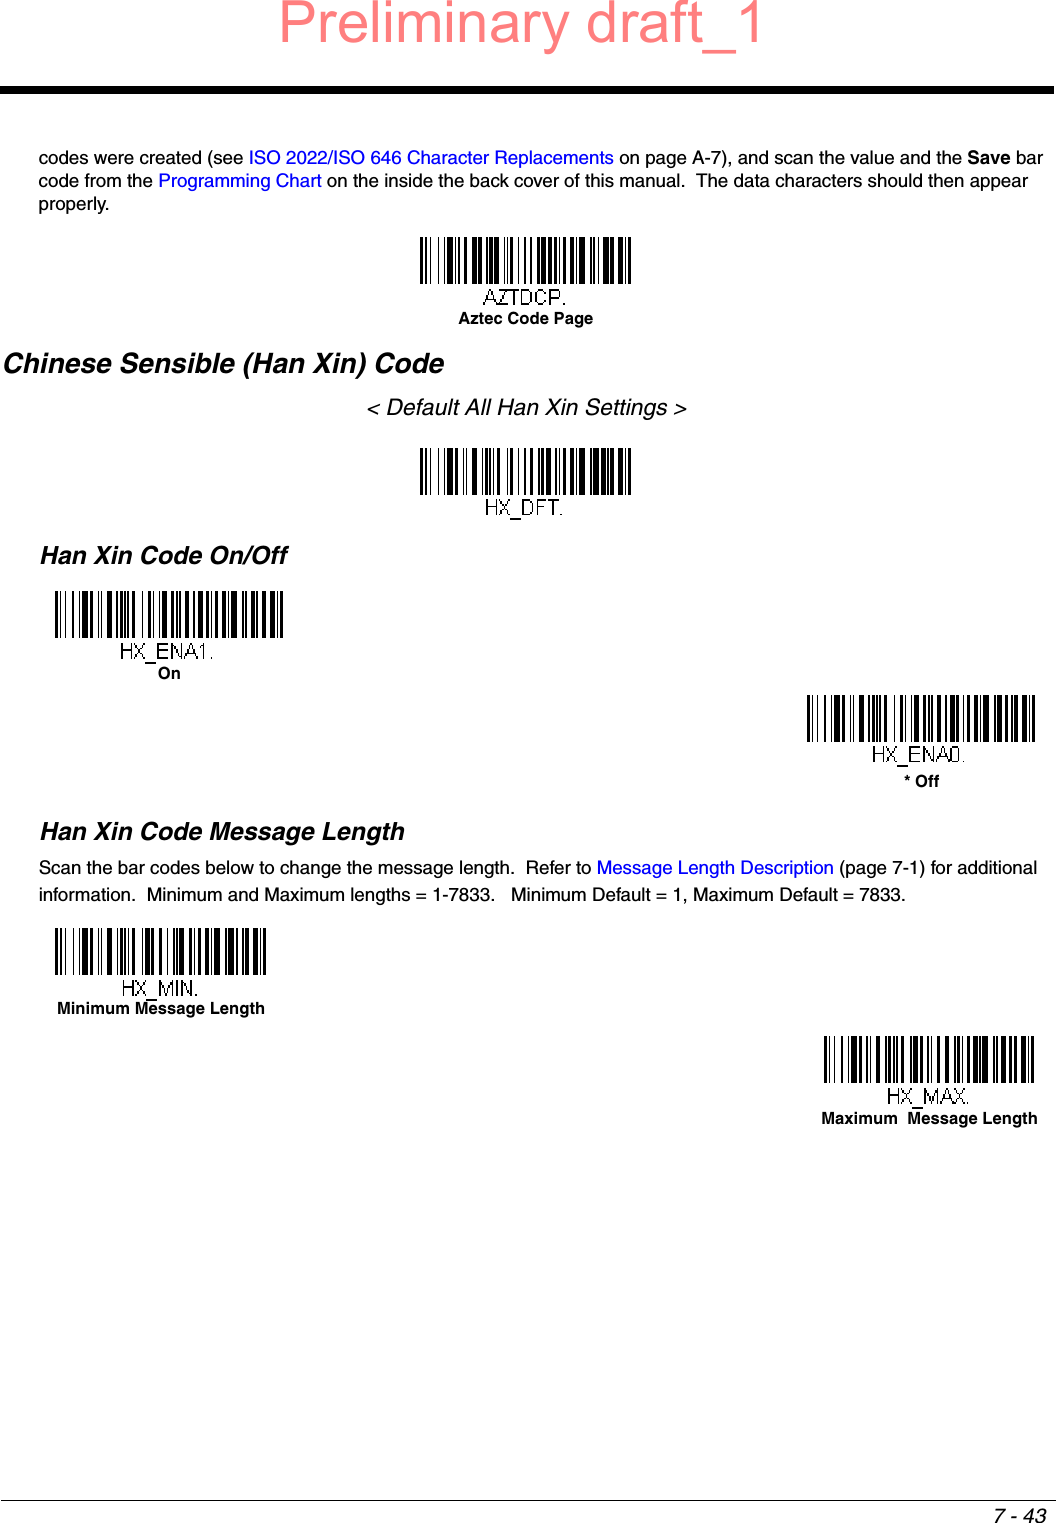 7 - 43codes were created (see ISO 2022/ISO 646 Character Replacements on page A-7), and scan the value and the Save bar code from the Programming Chart on the inside the back cover of this manual.  The data characters should then appear properly.Chinese Sensible (Han Xin) Code&lt; Default All Han Xin Settings &gt;Han Xin Code On/OffHan Xin Code Message LengthScan the bar codes below to change the message length.  Refer to Message Length Description (page 7-1) for additional information.  Minimum and Maximum lengths = 1-7833.   Minimum Default = 1, Maximum Default = 7833.Aztec Code PageOn* OffMinimum Message LengthMaximum  Message LengthPreliminary draft_1